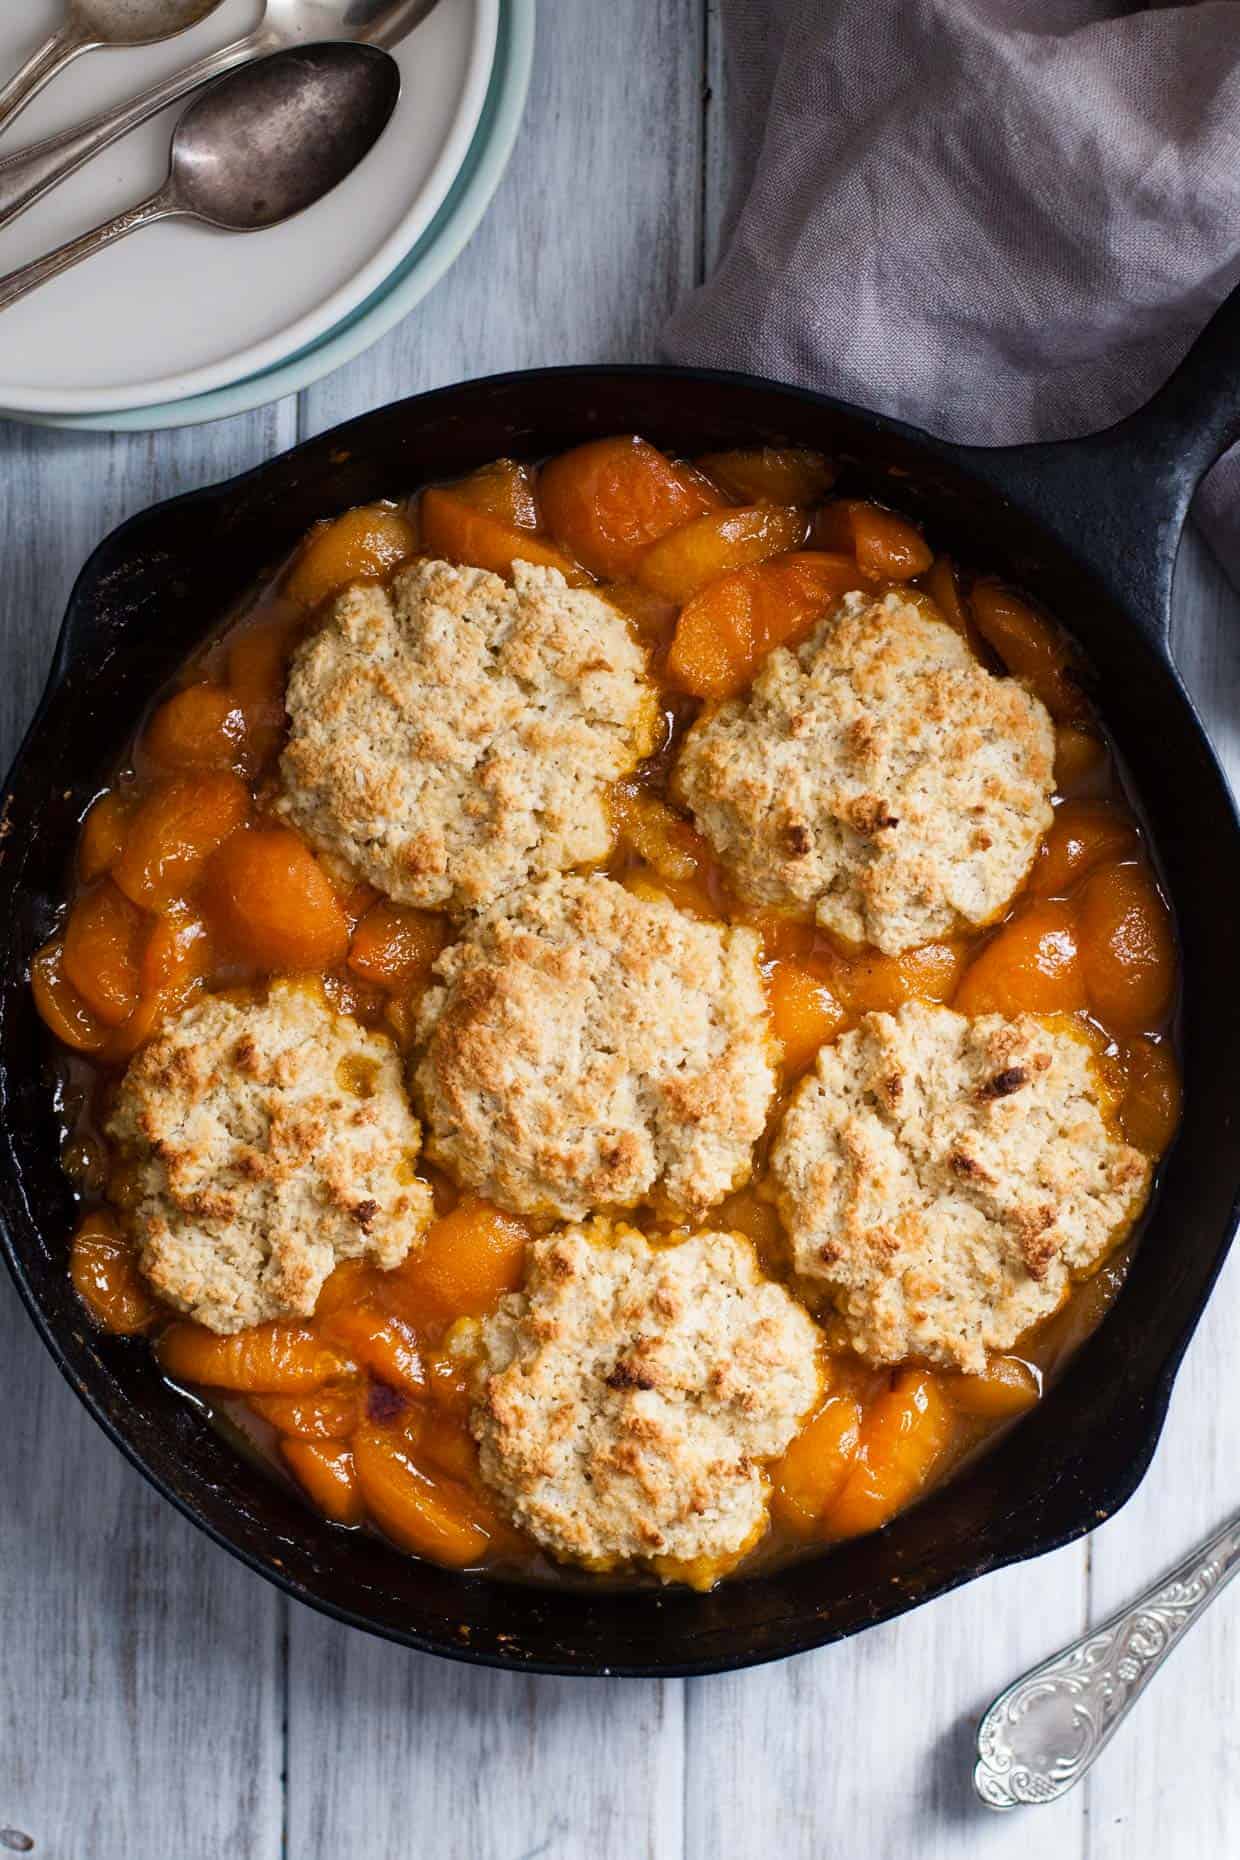 Apricot Cobbler with Buttermilk Biscuits